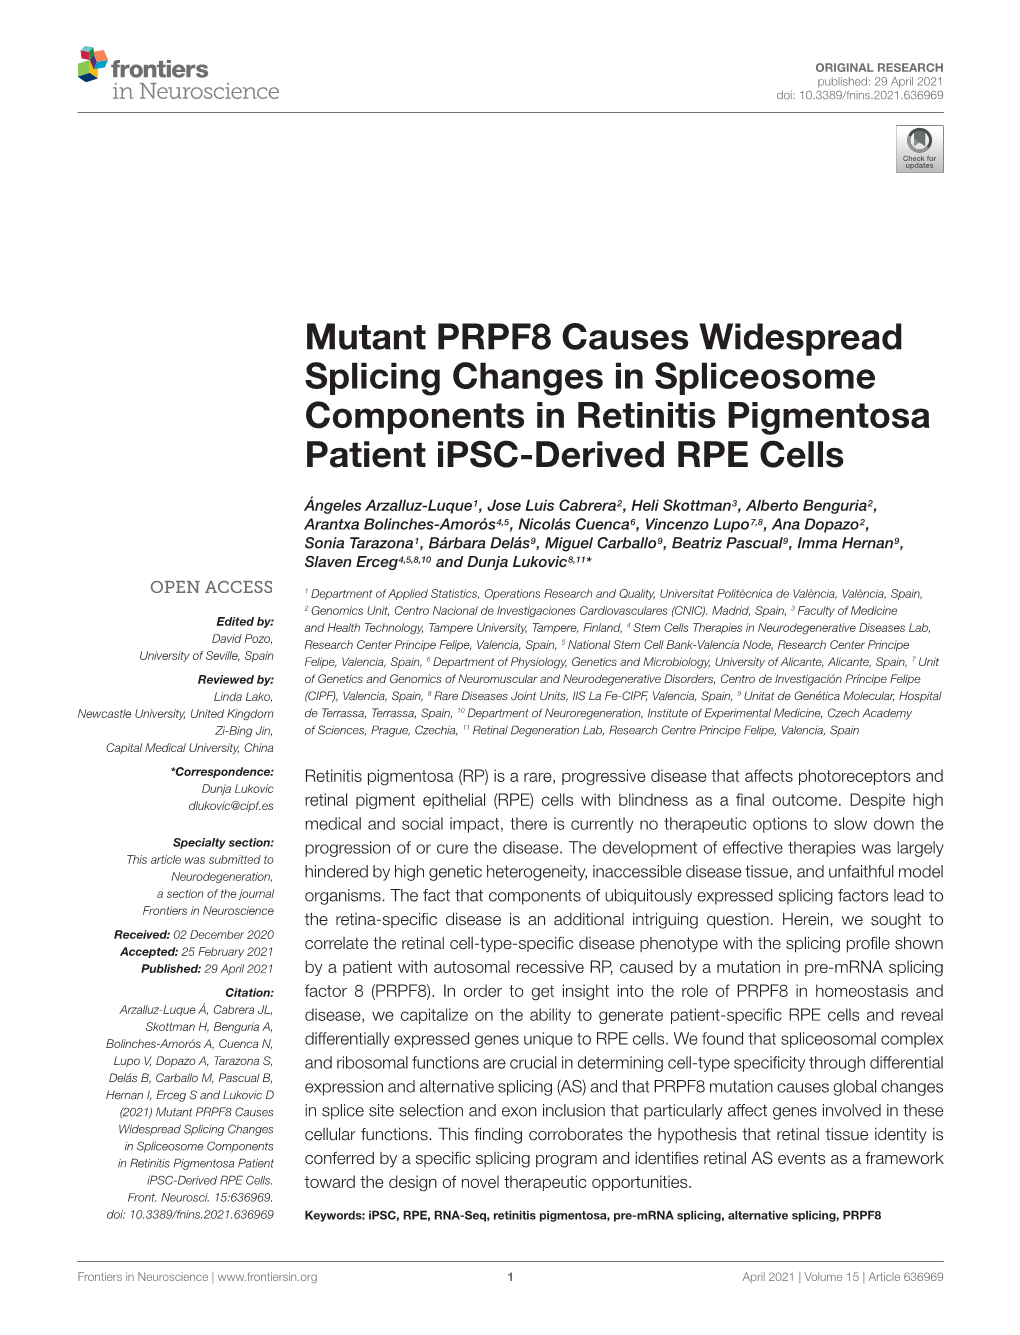 Mutant PRPF8 Causes Widespread Splicing Changes in Spliceosome Components in Retinitis Pigmentosa Patient Ipsc-Derived RPE Cells